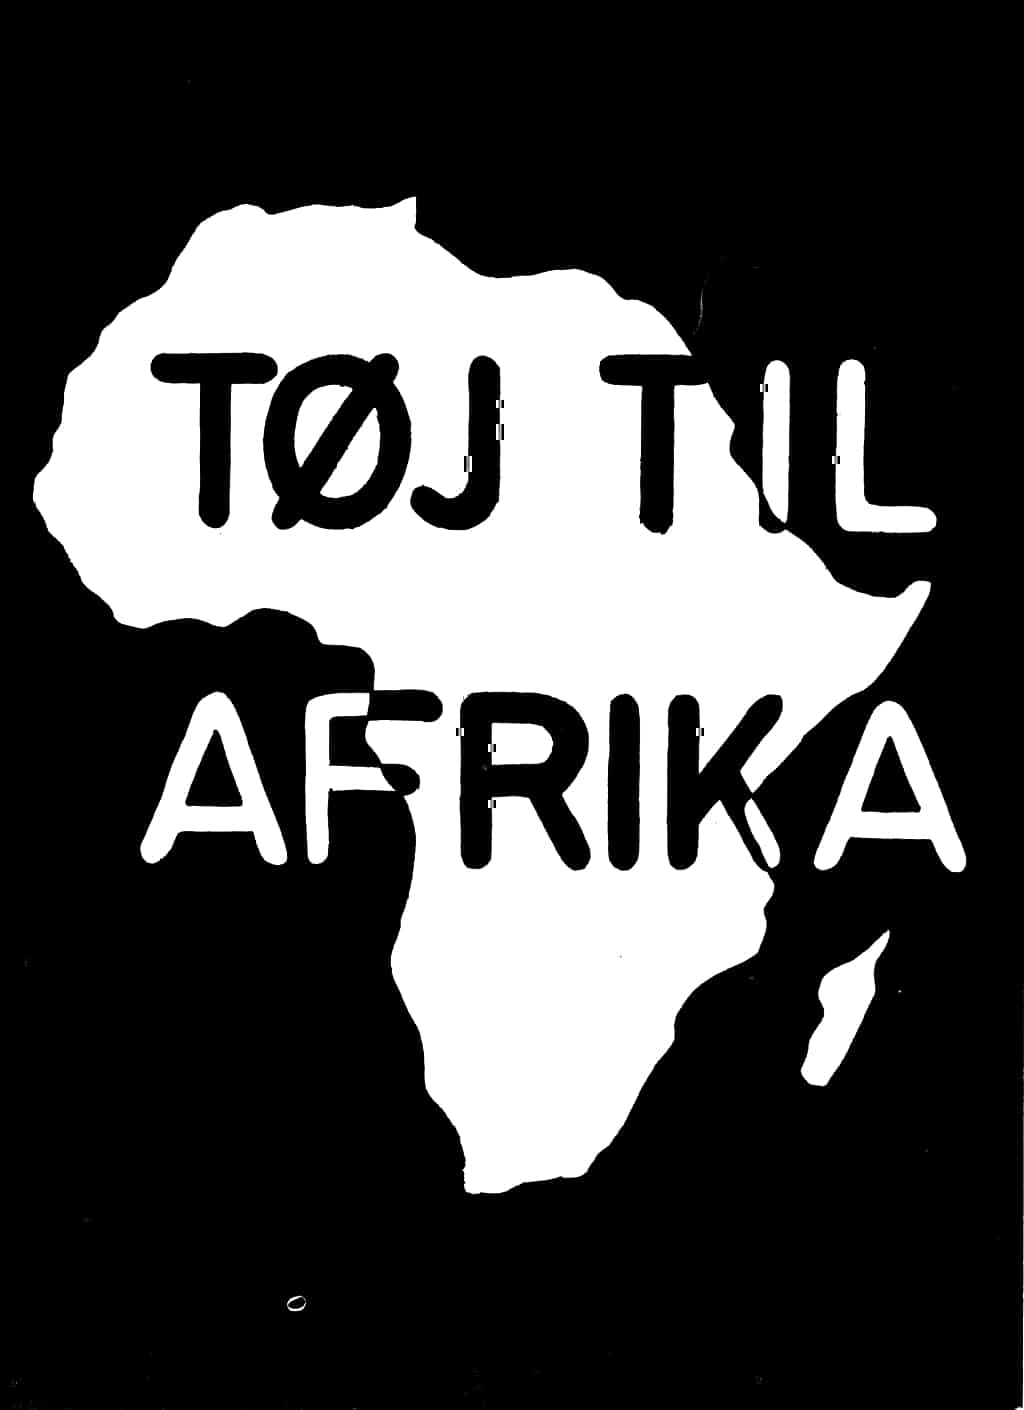 "Clothes to Africa" - the name of practical solidarity organisation, started by KAK/KUF in 1972 and later continued by M-KA.